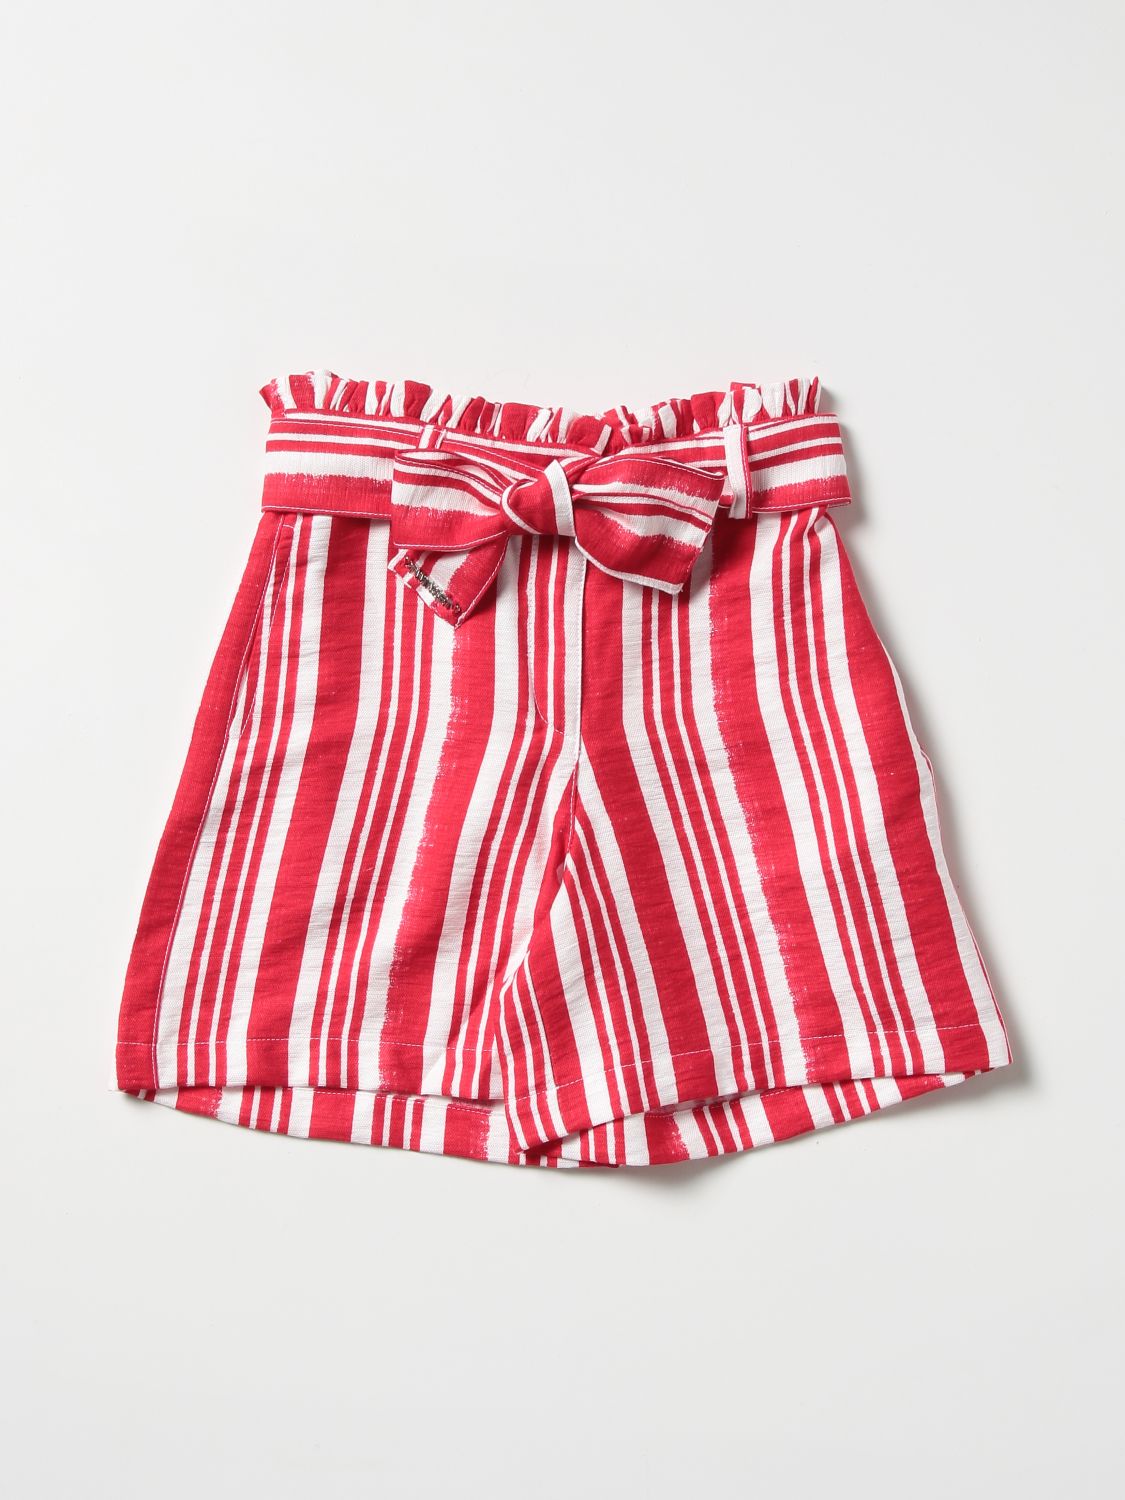 Twinset Kids' Striped Shorts In Red